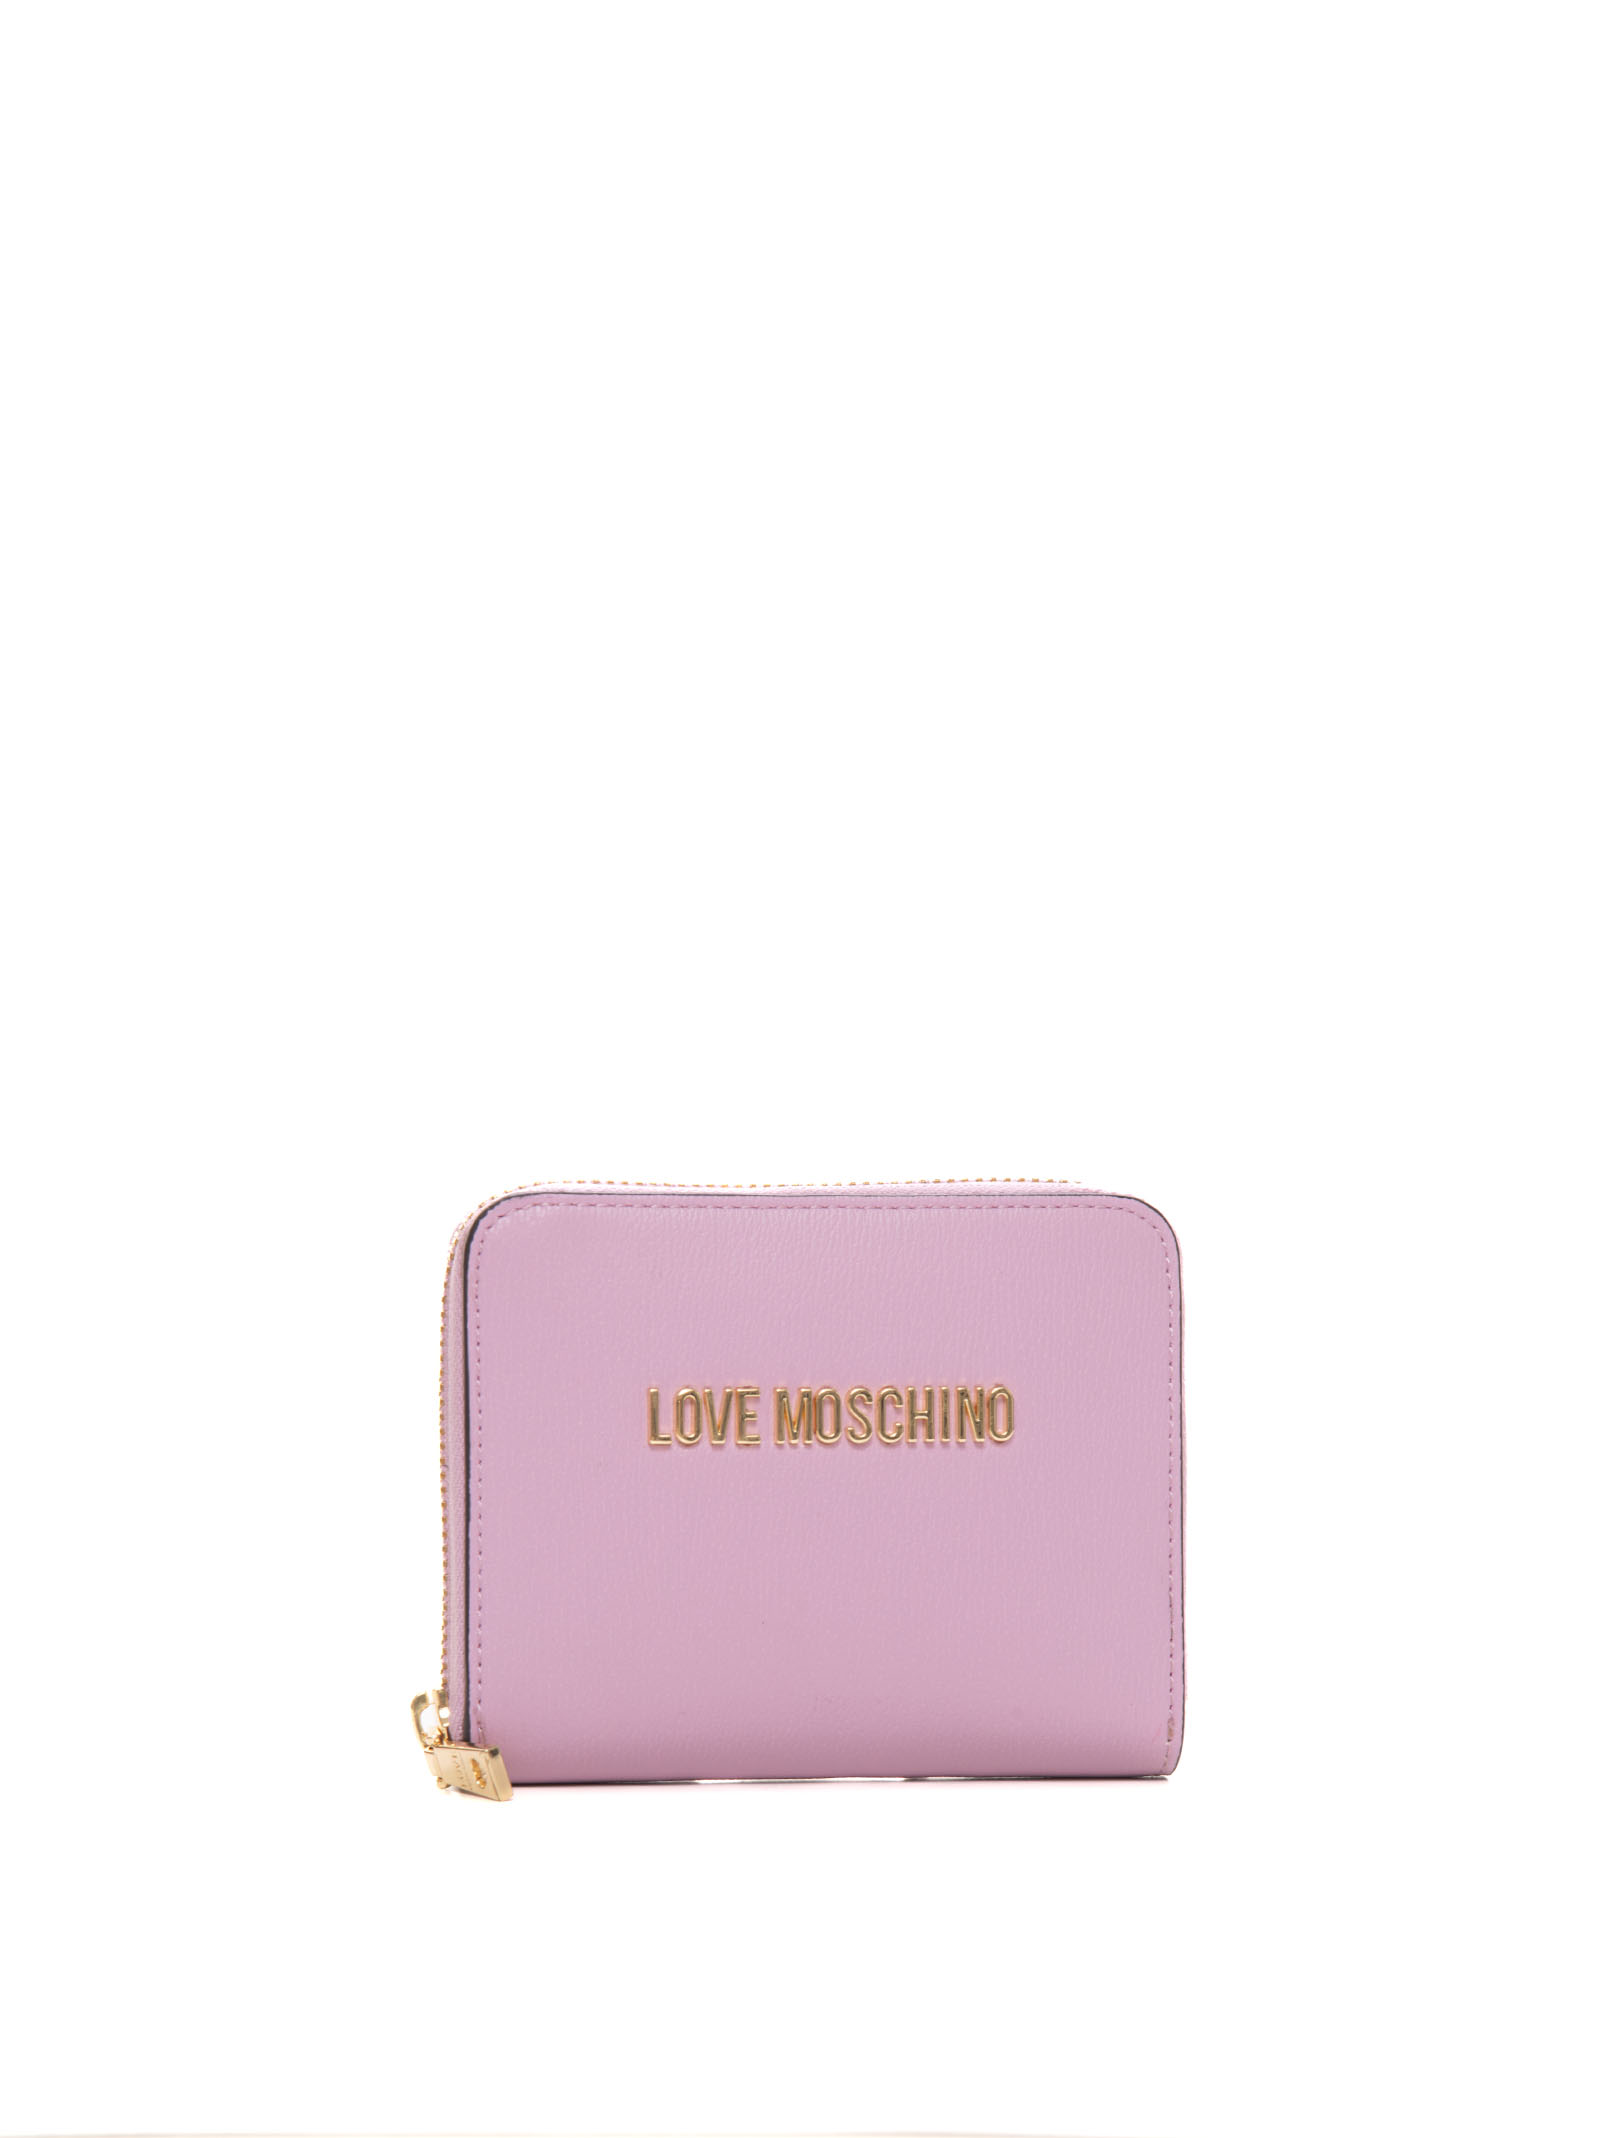 Love Moschino Wallet Medium Size In Lilac